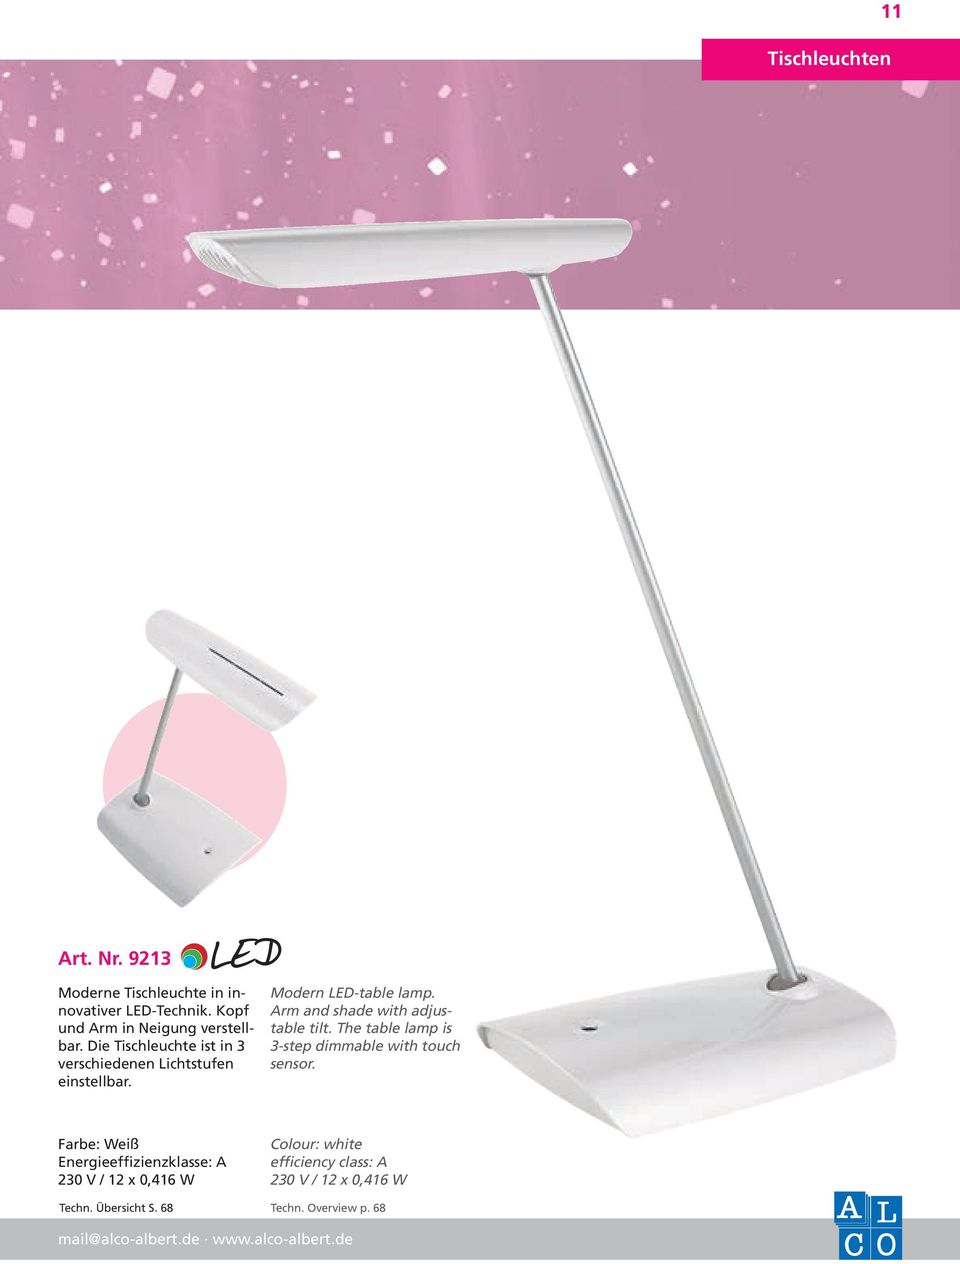 Modern -table lamp. Arm and shade with adjustable tilt. The table lamp is 3-step dimmable with touch sensor.